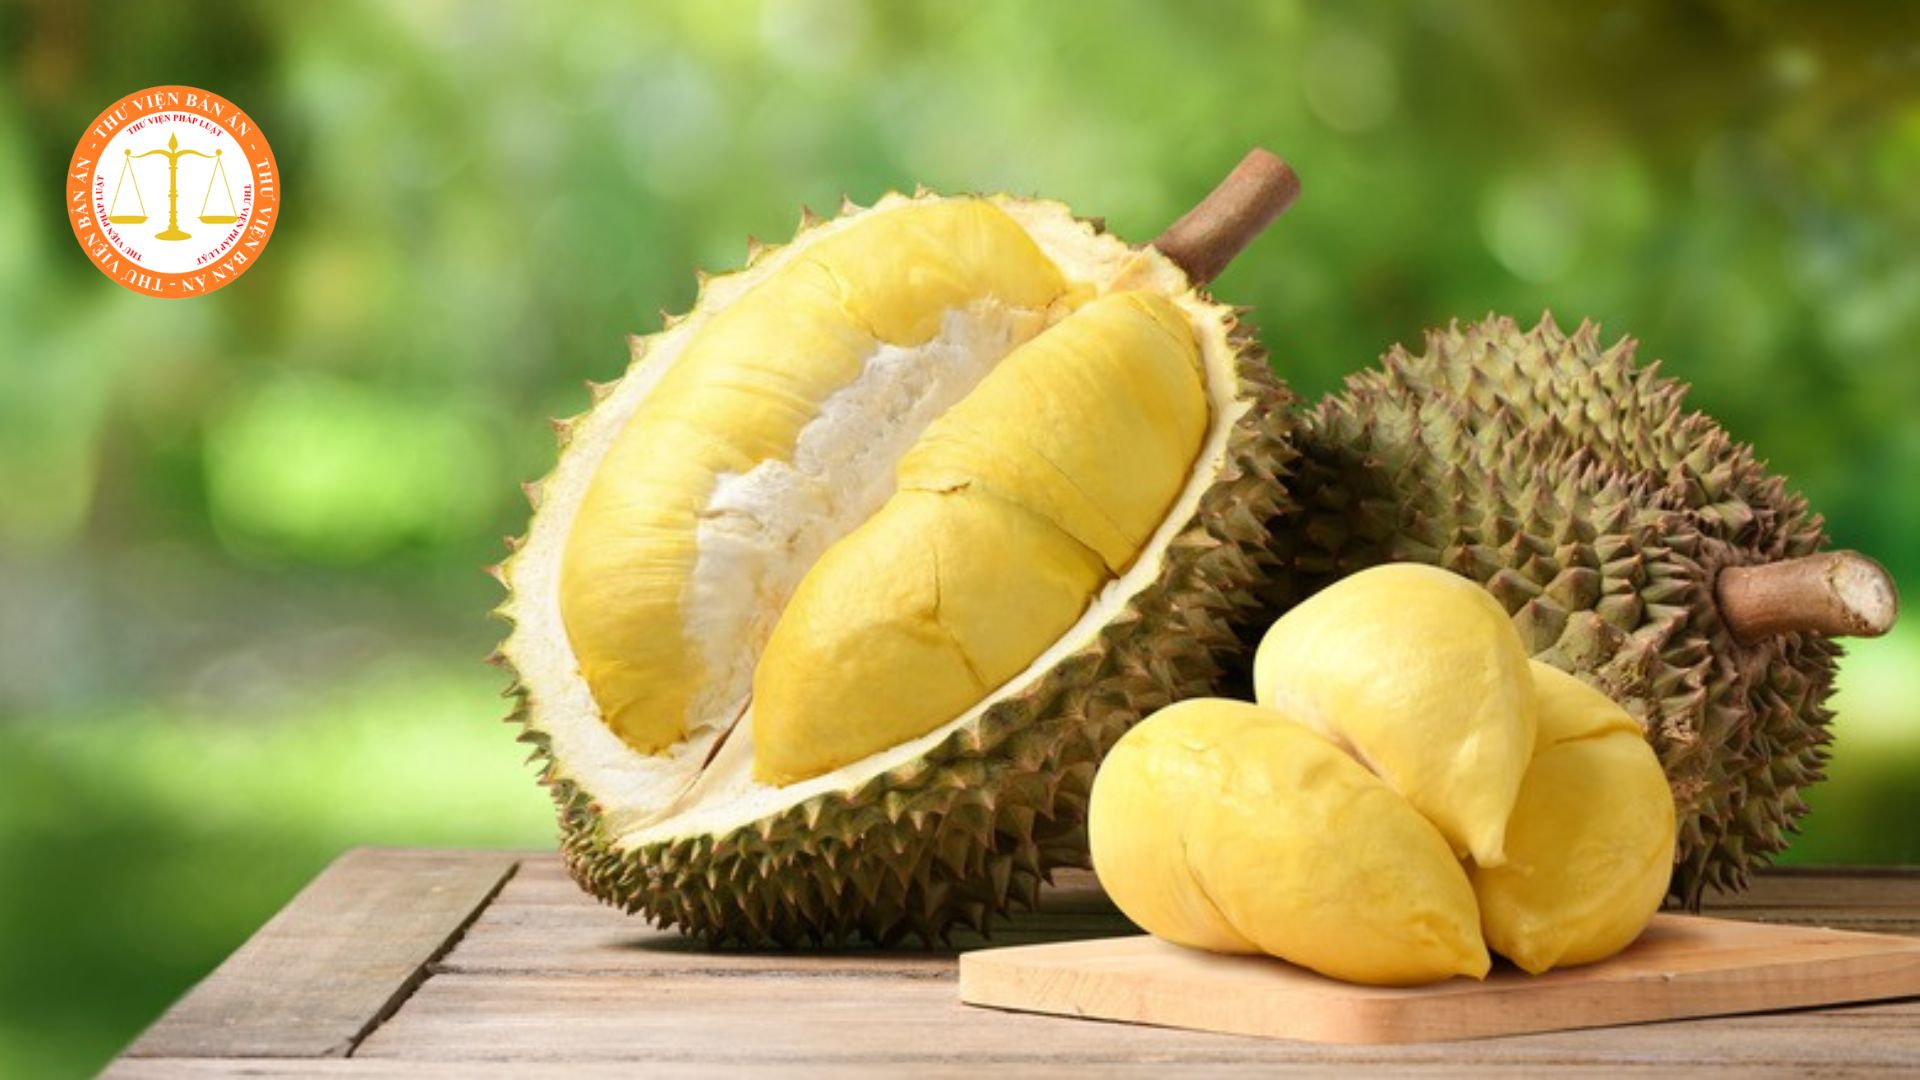 What are the quality and classification requirements for durian in Vietnam?